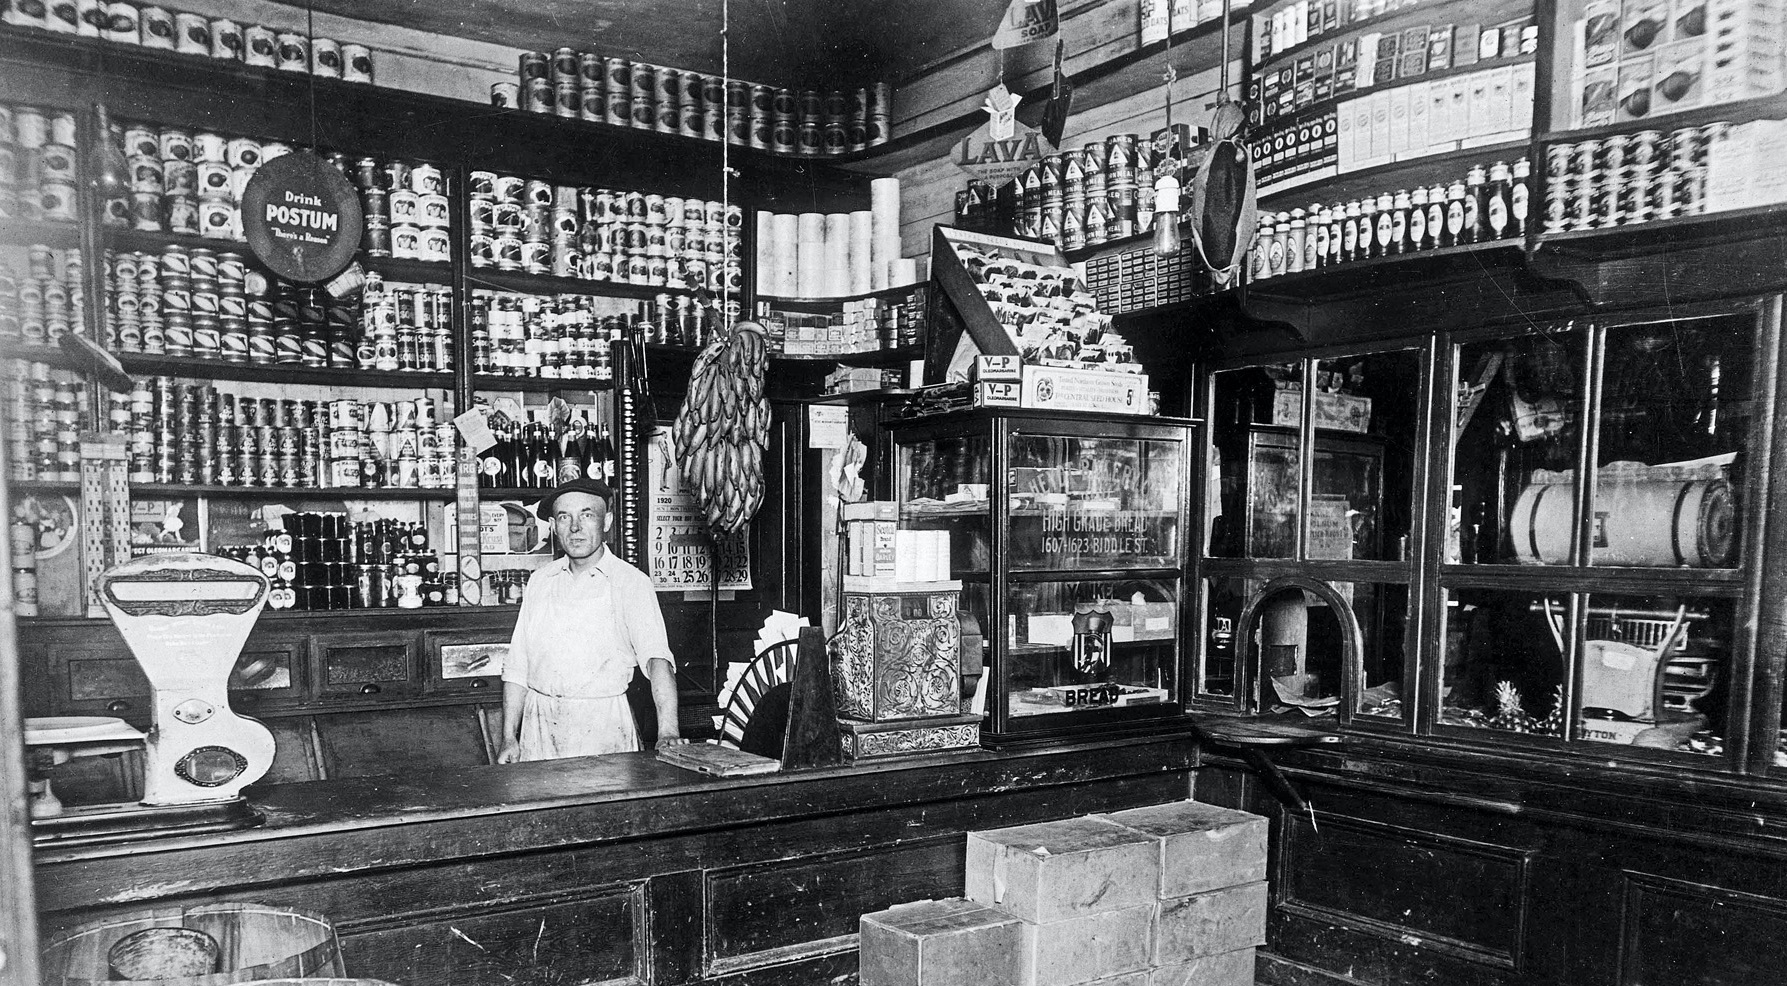 a-grocery-story-america-s-first-supermarket-opens-in-queens-1930-the